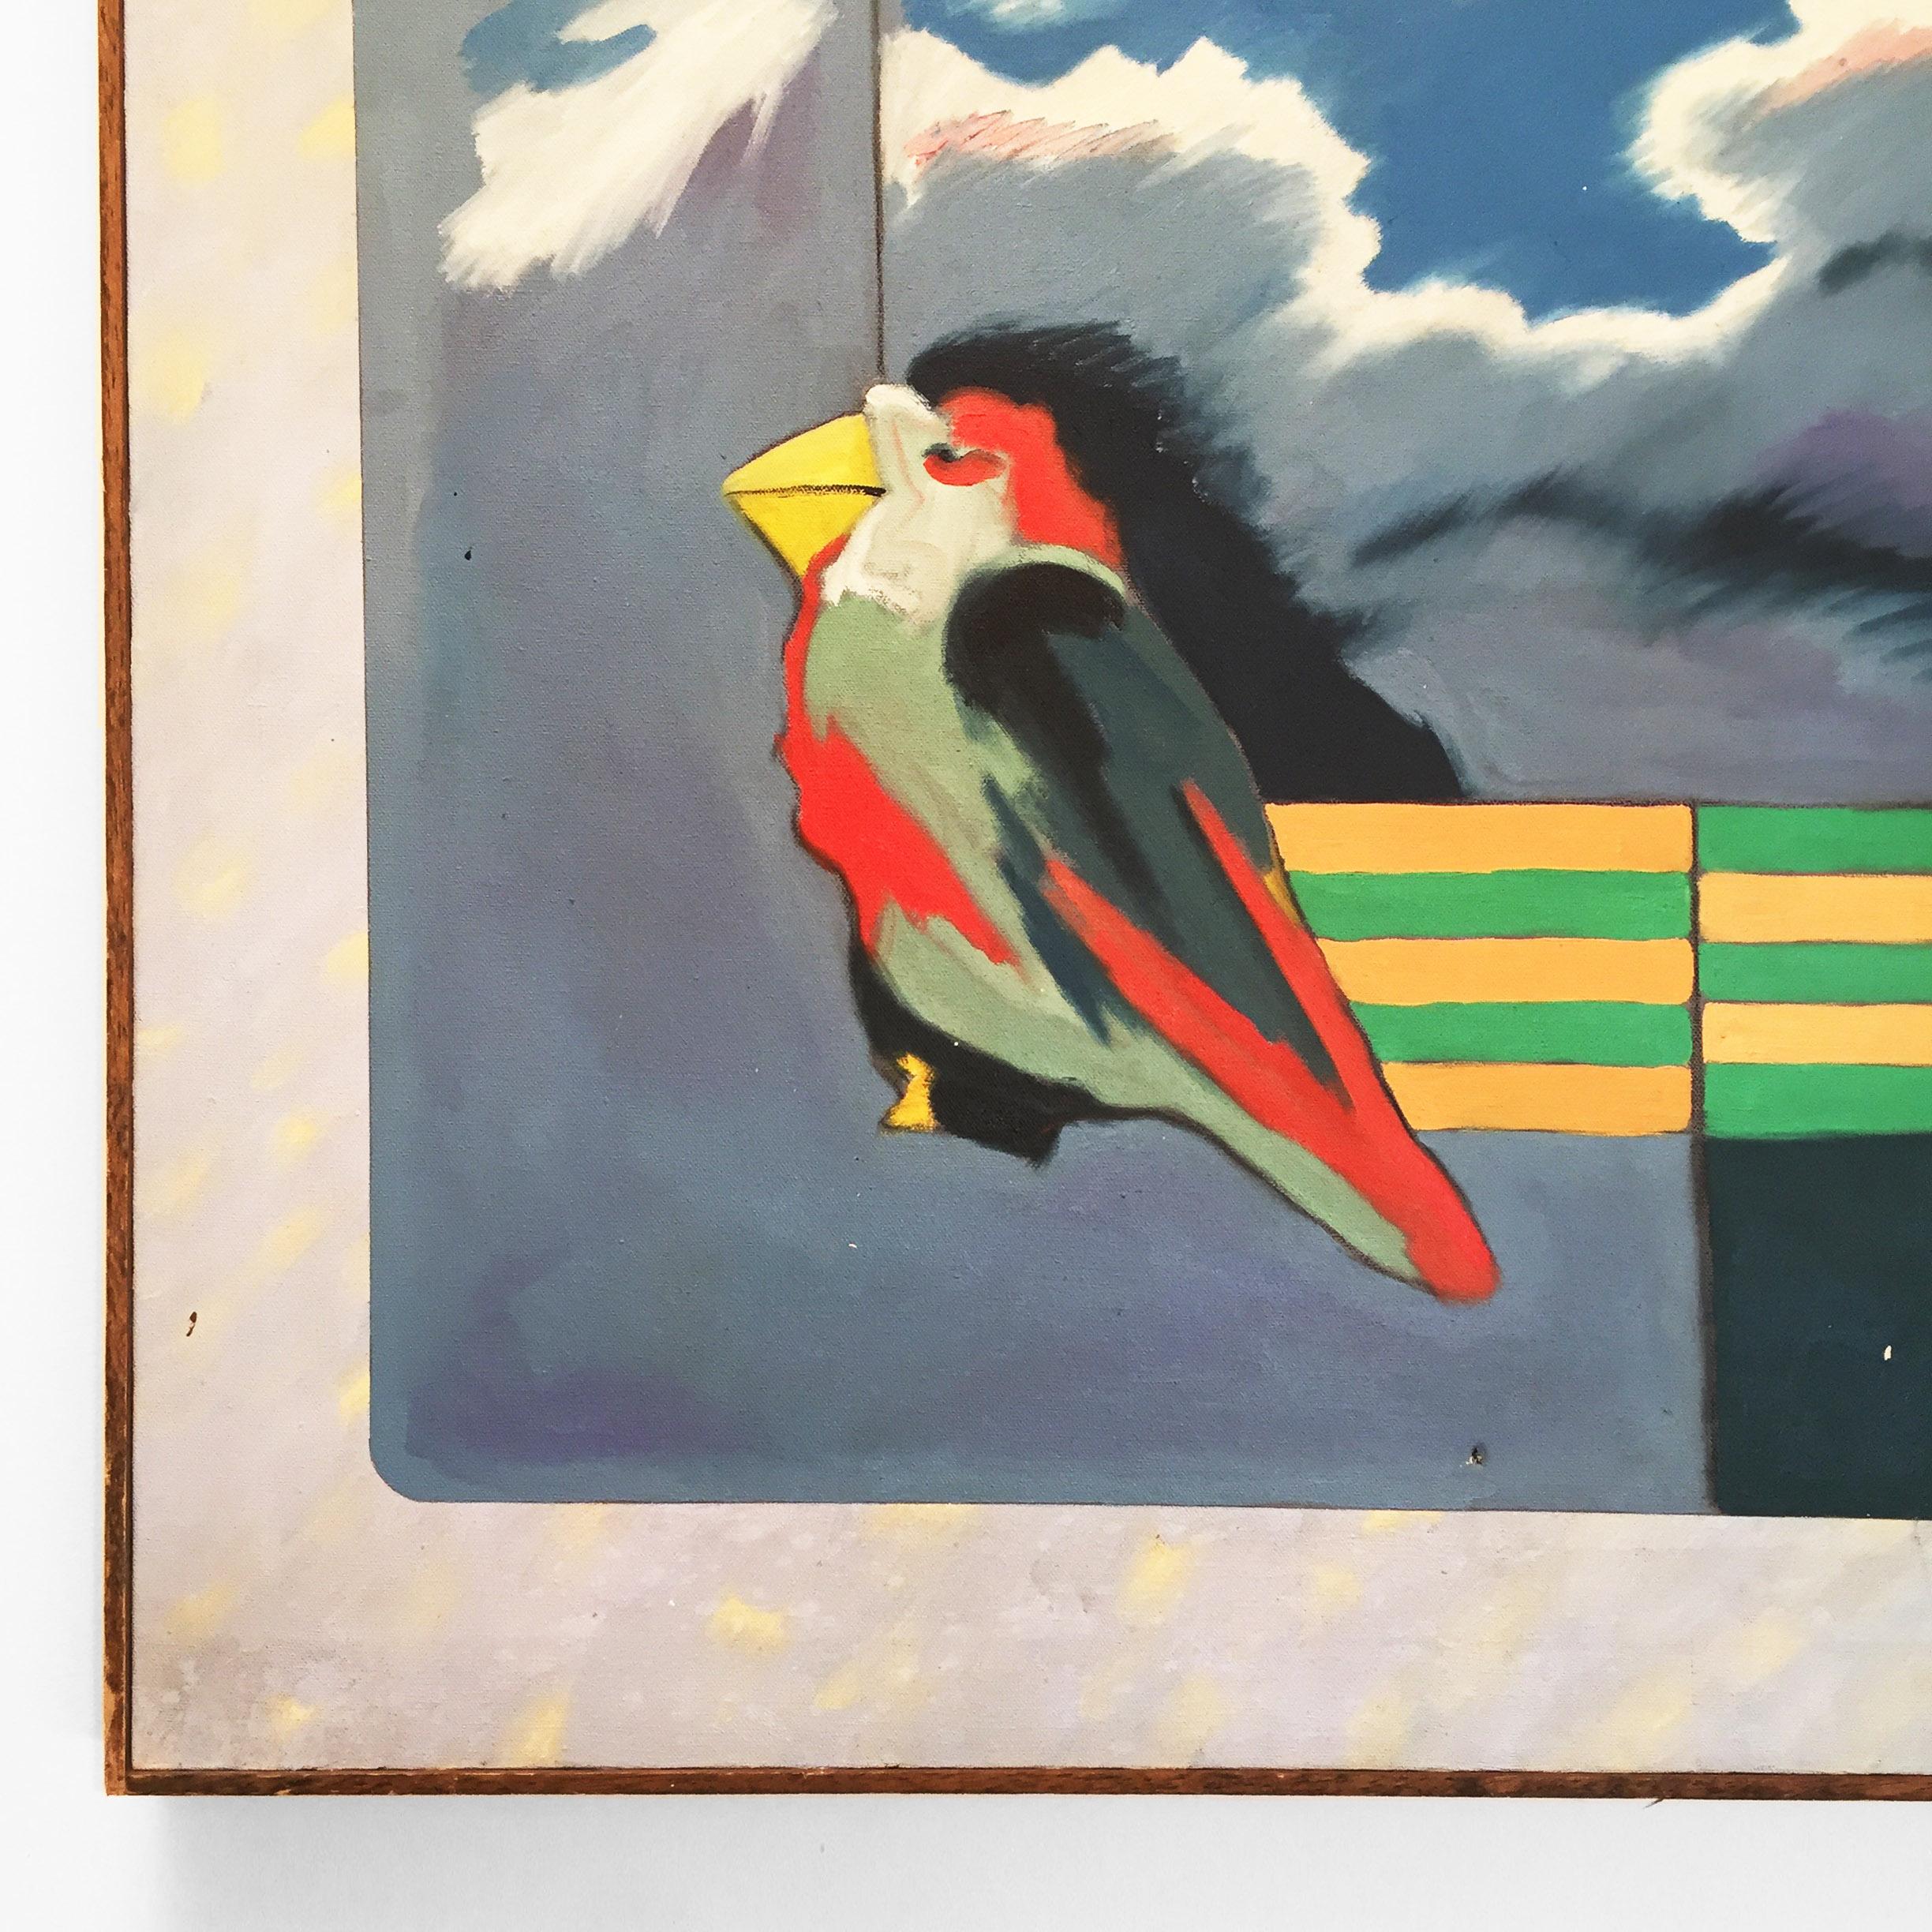 Richard Frank 'Wise Bird Strategy' Painting Oil On Canvas 1980s Art Artwork For Sale 1